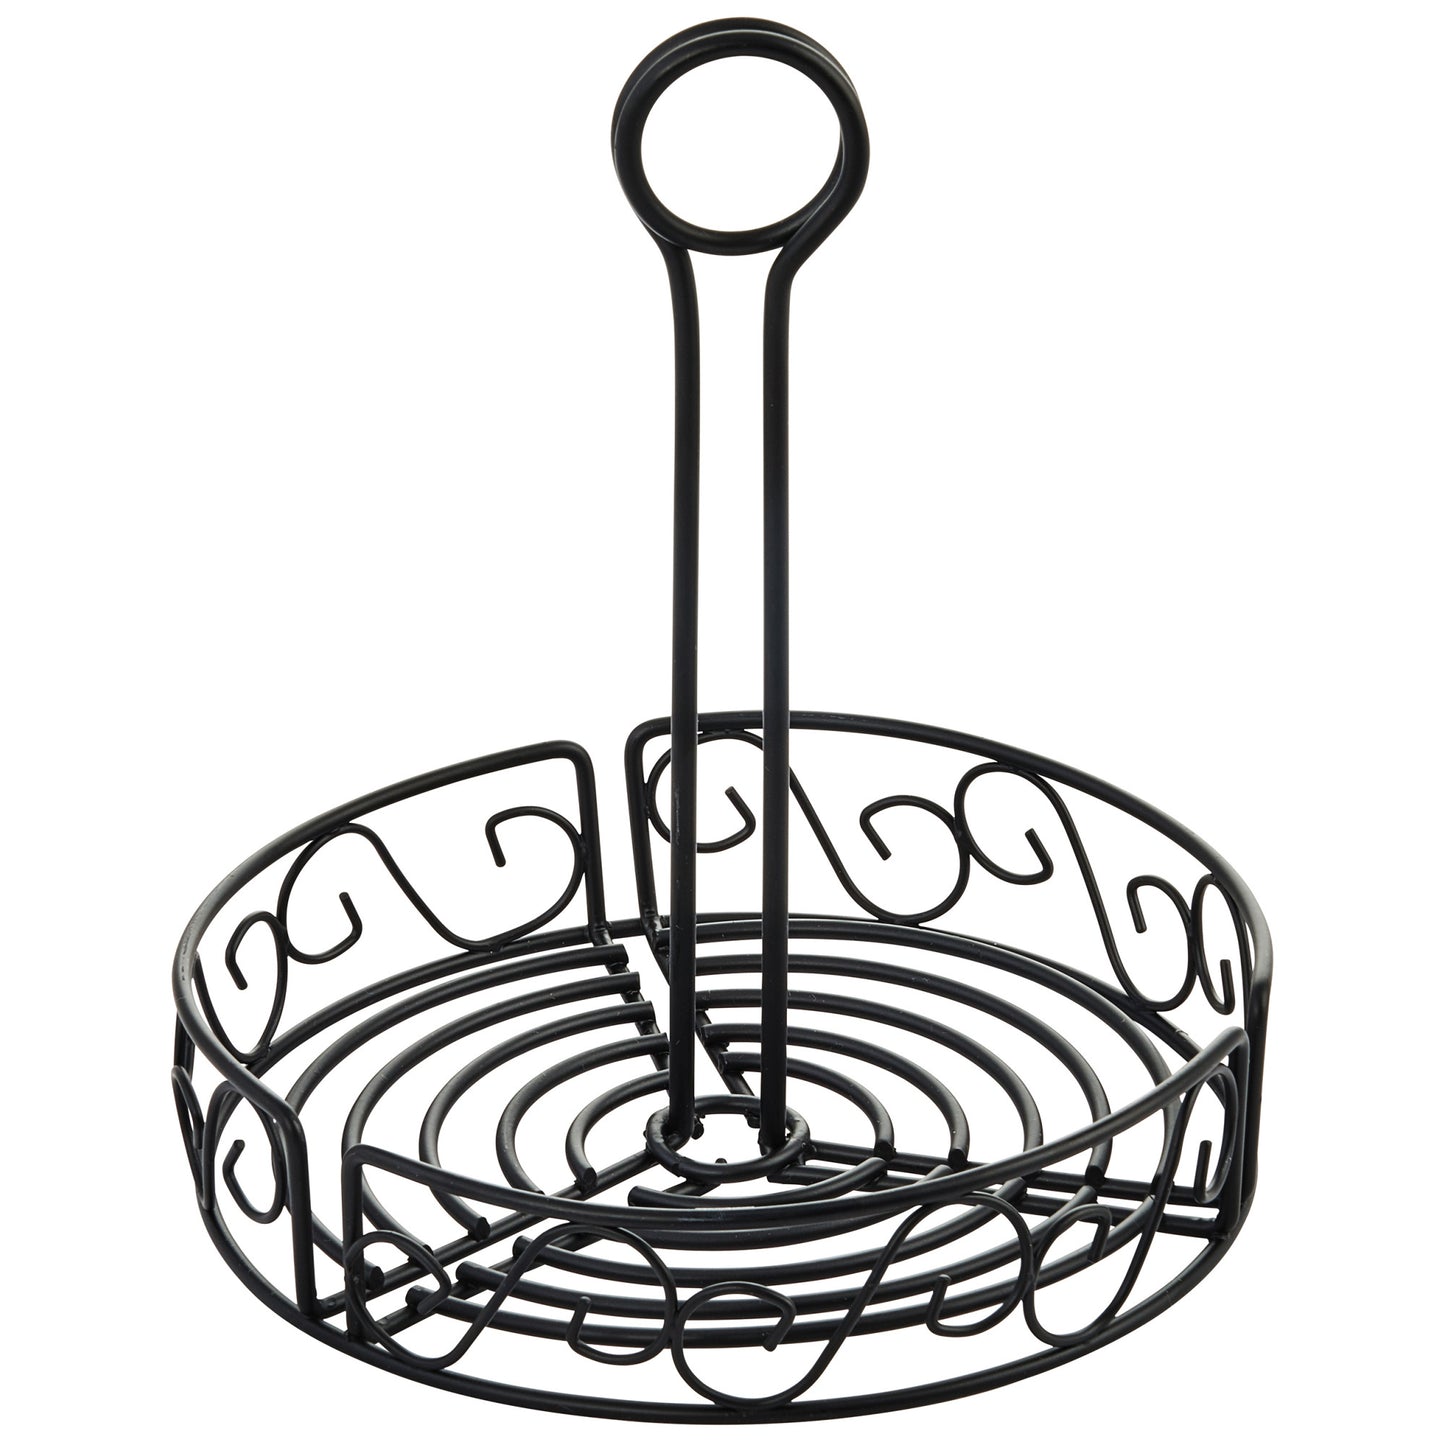 WBKH-7R - 7-1/2" Round Wire Condiment Caddy with 9" Handle